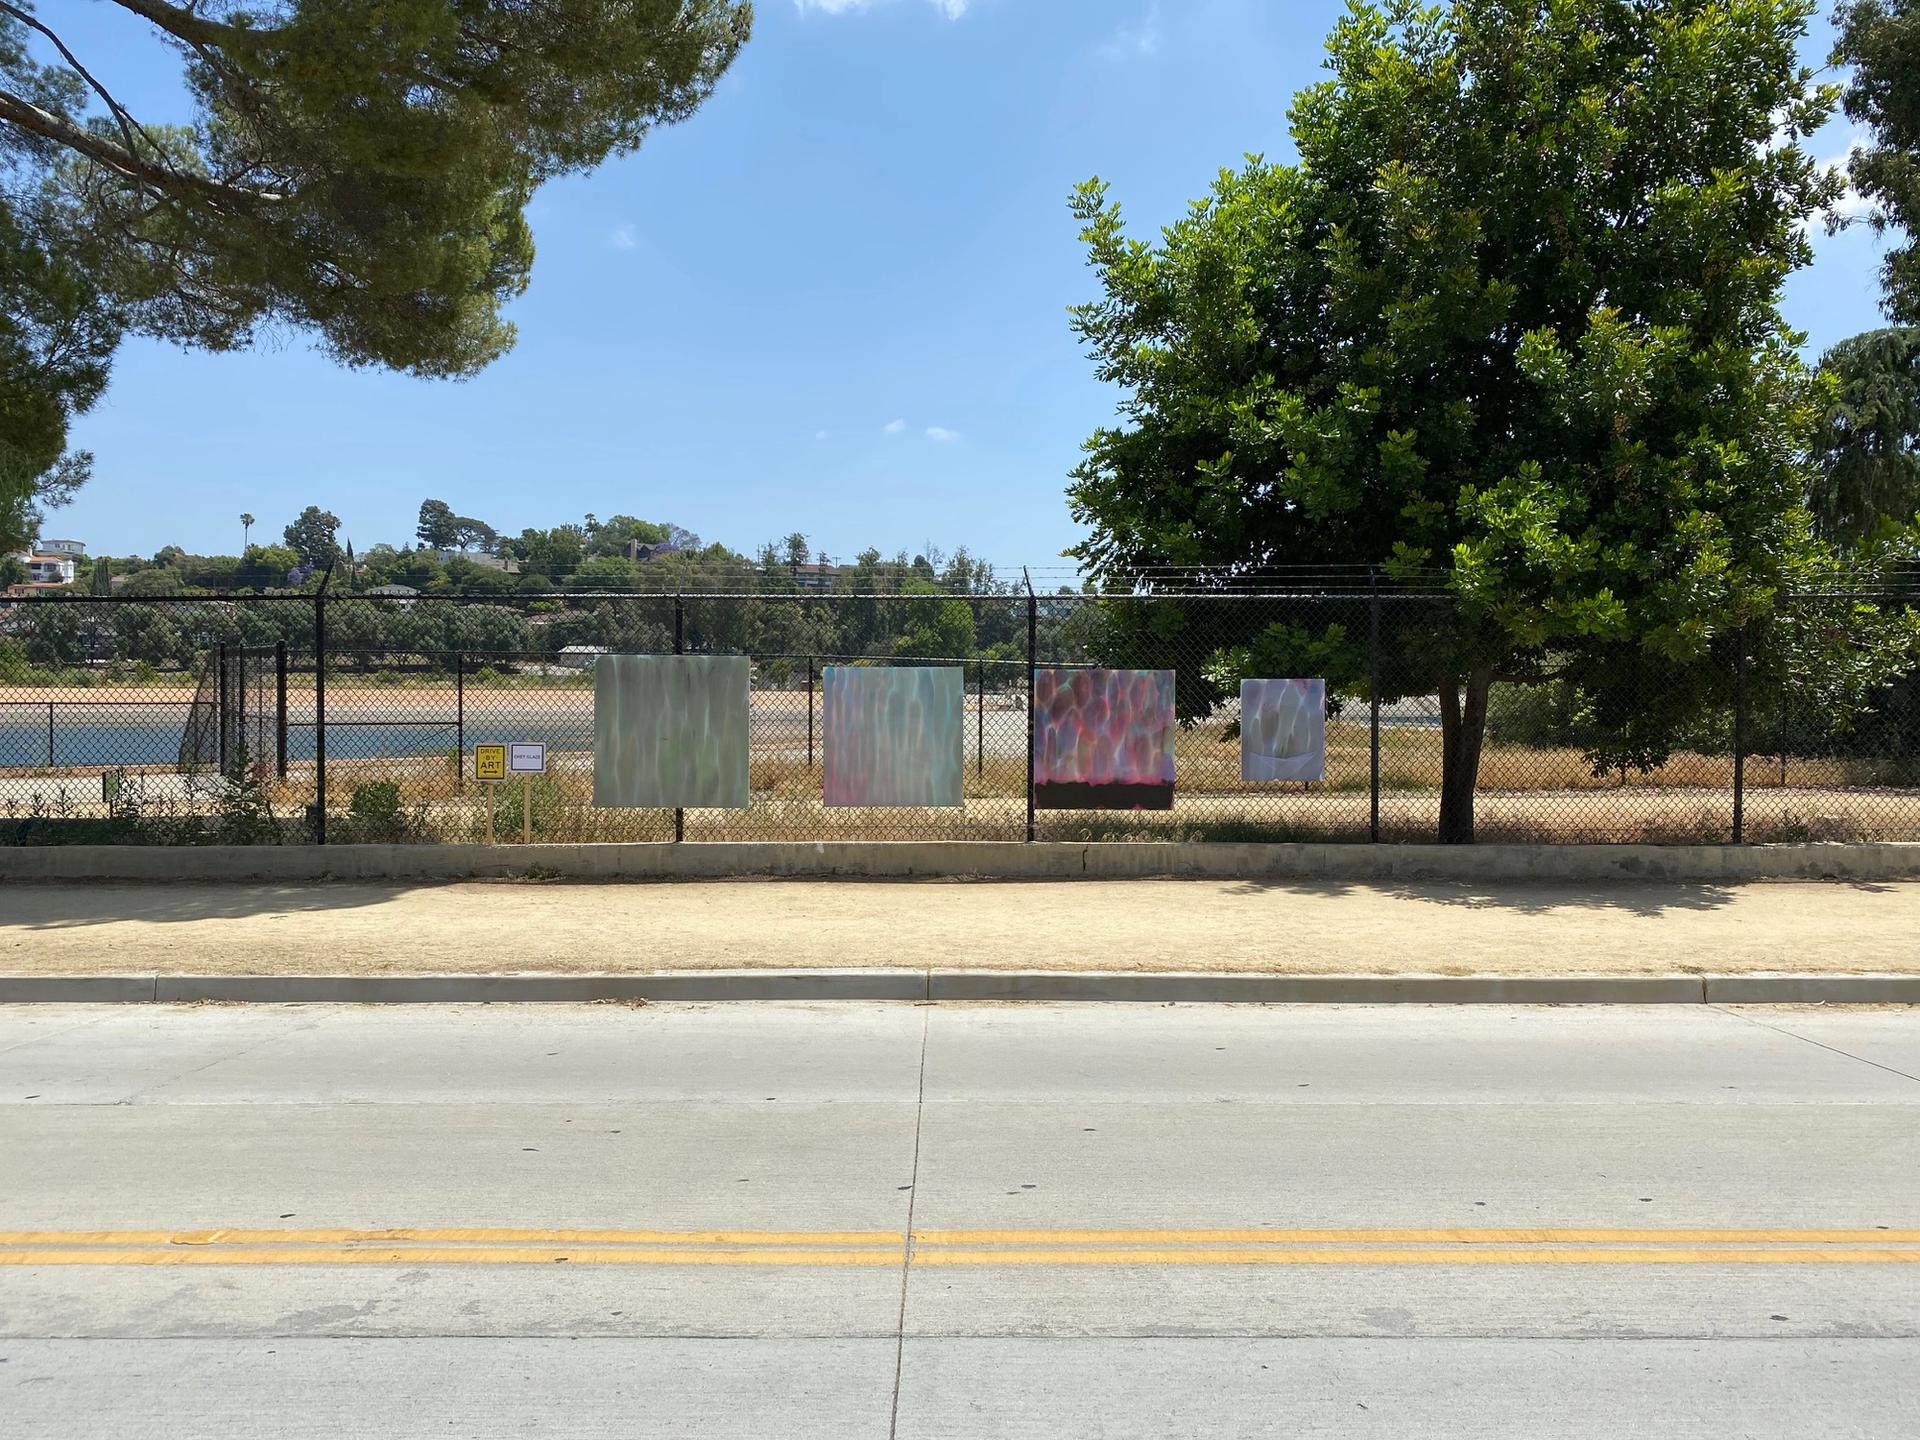 Chet Glaze, Thick Slick (2019), Scuzzy Drip (2019), VW Driveway (2020), Tramp Camp (2019)  installed on Silver Lake Drive in LA 